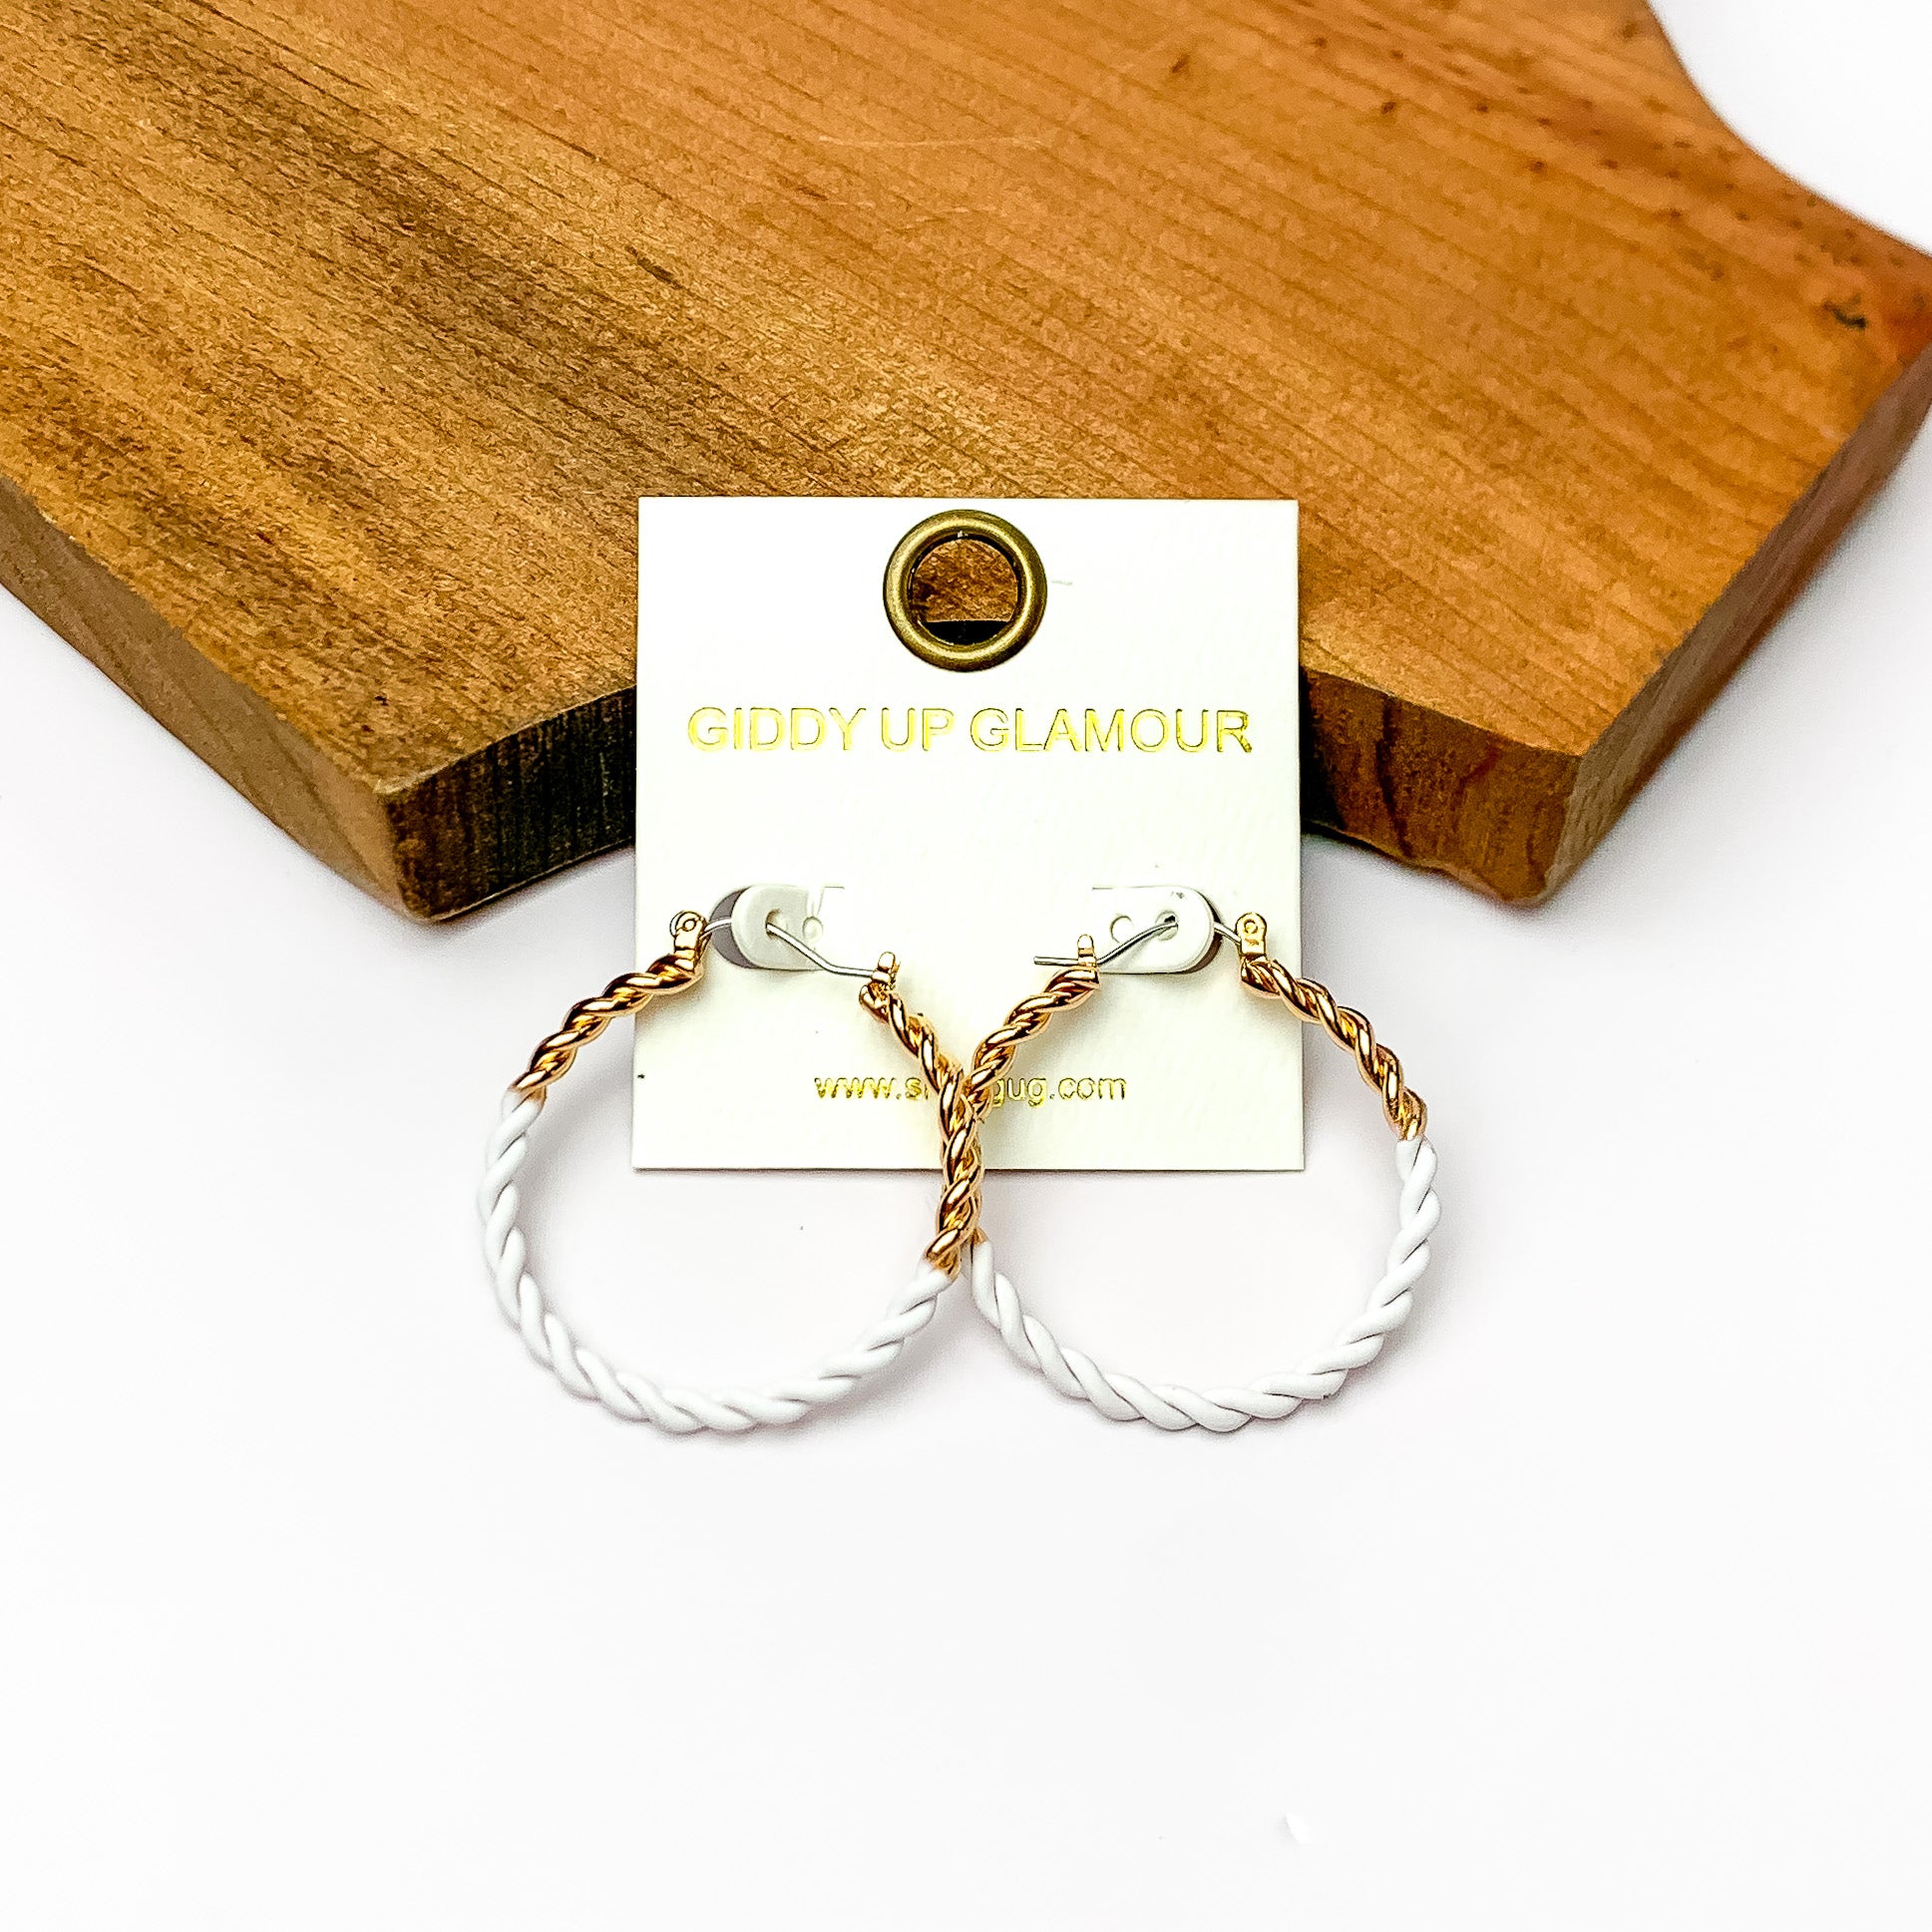 Twisted Gold Tone Hoop Earrings in White. Pictured on a white background with wood at the top.